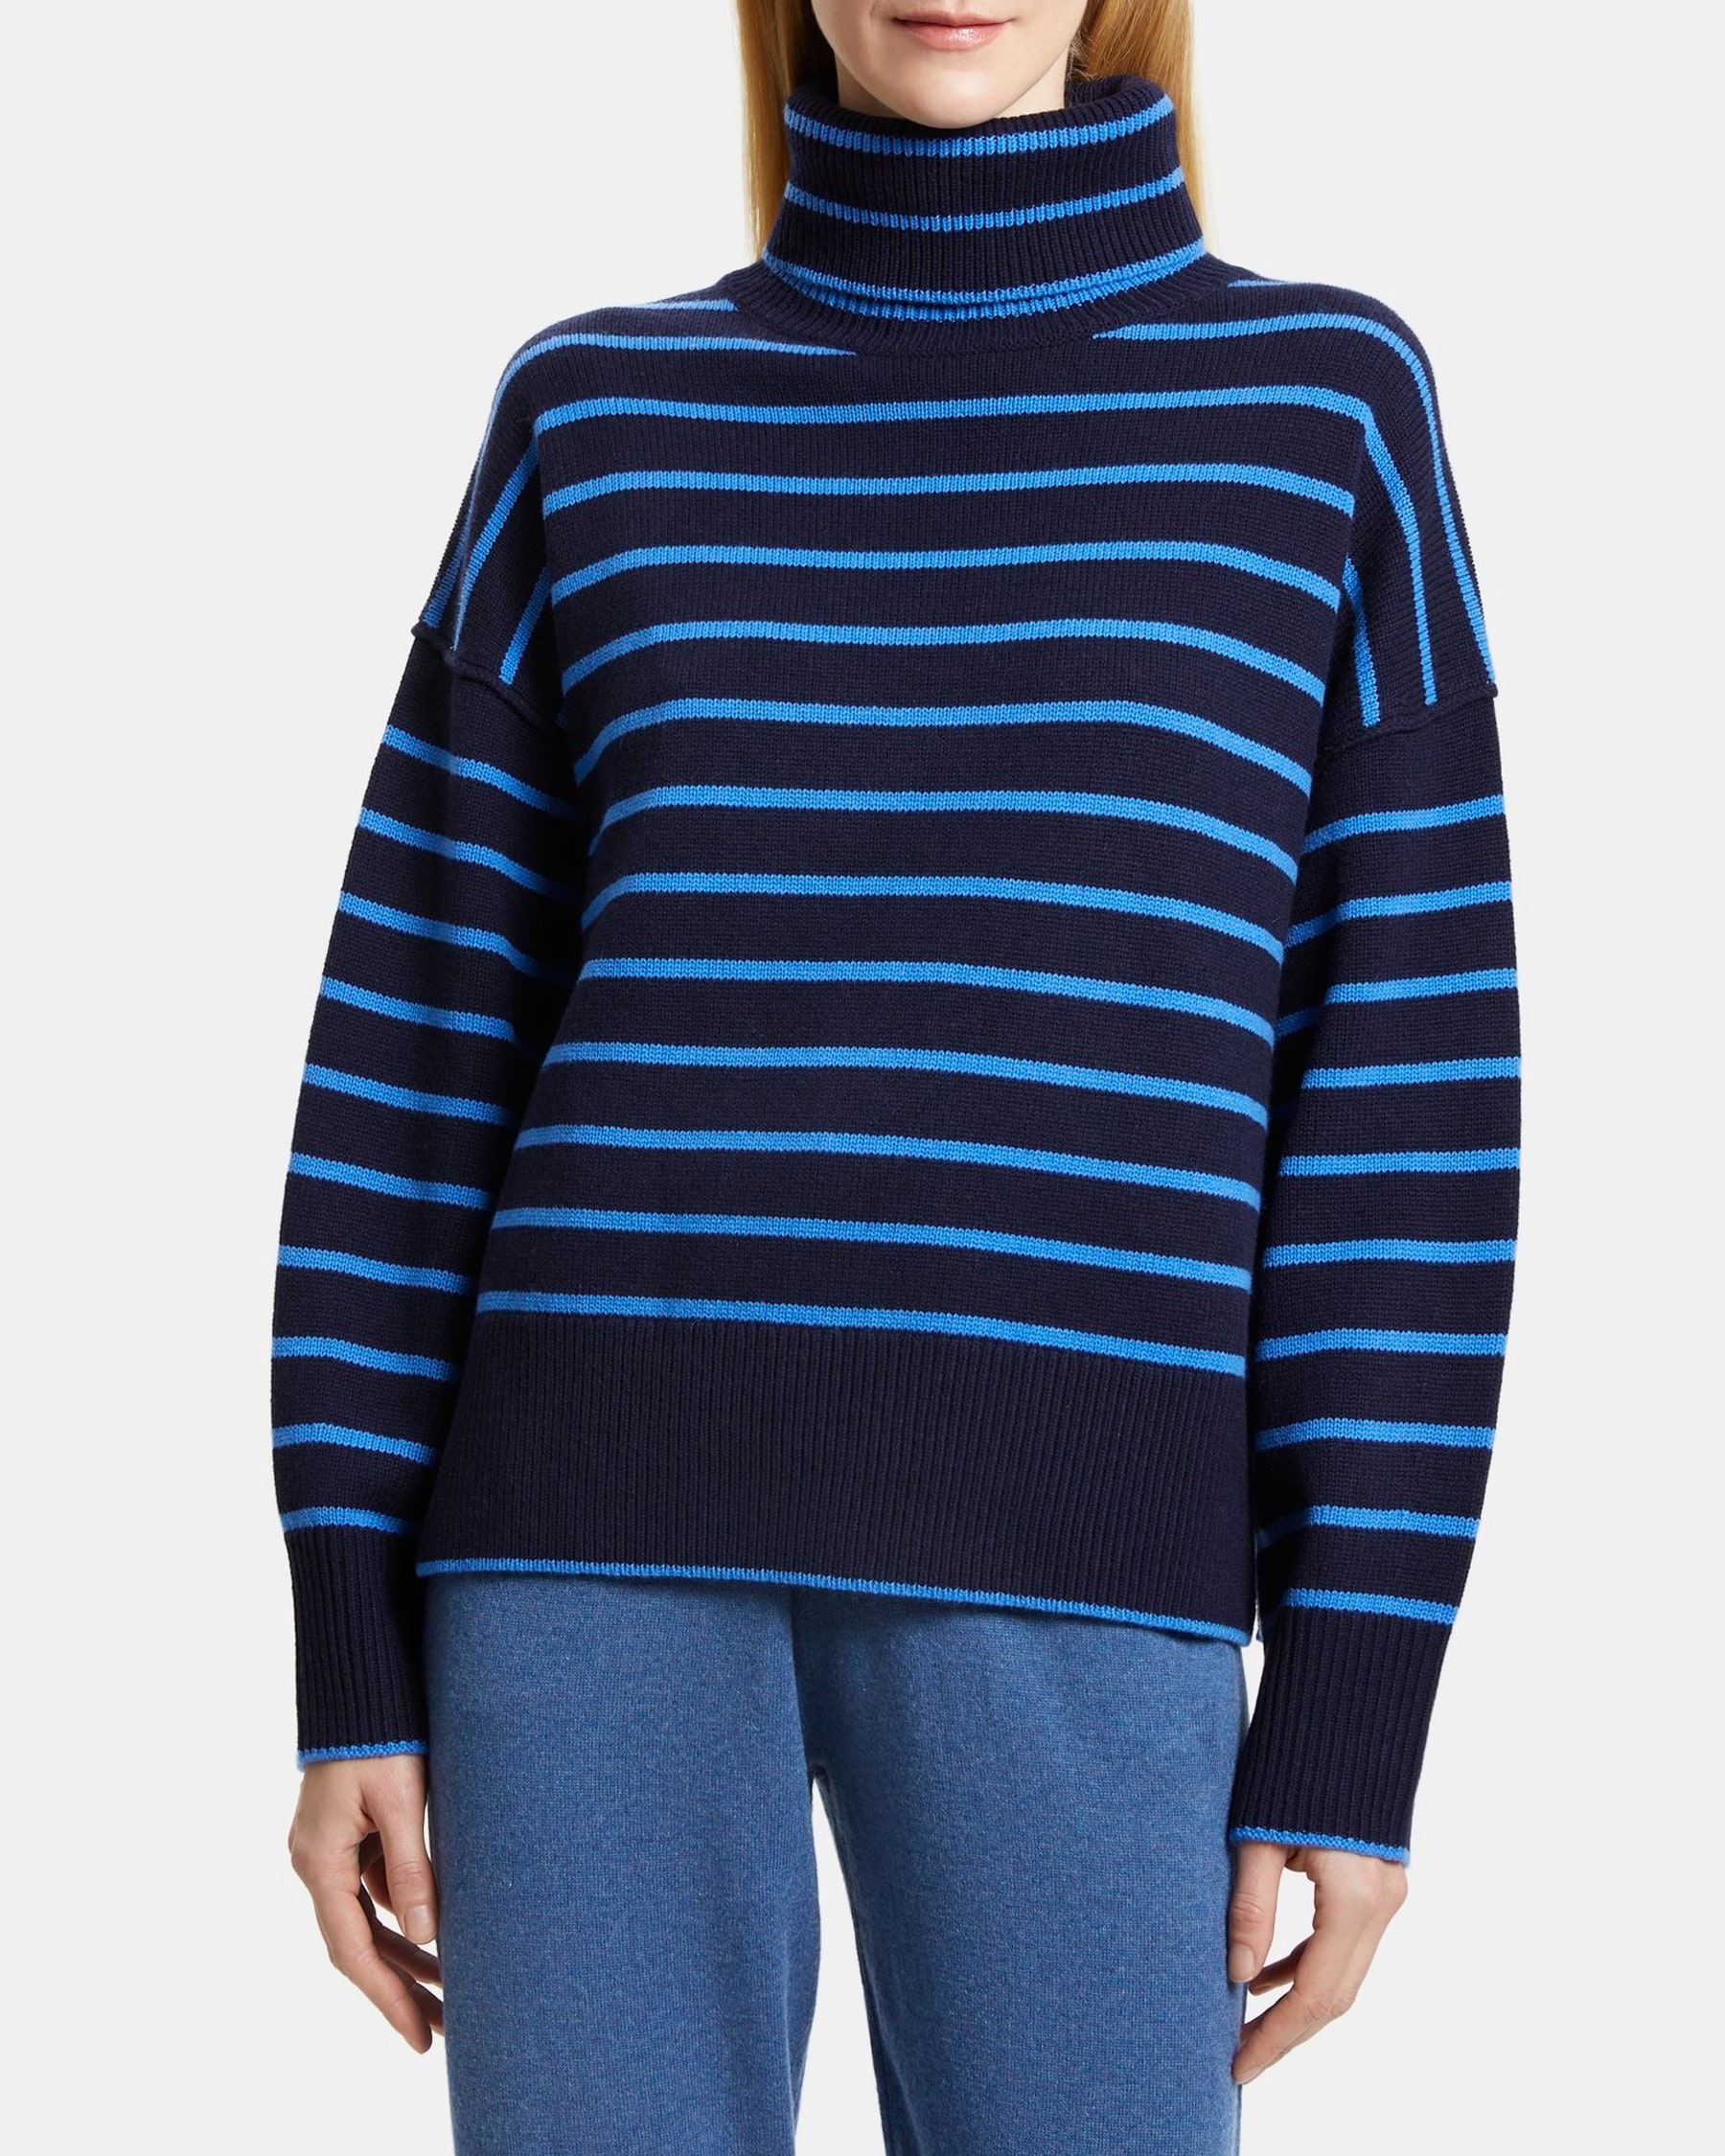 Striped Turtleneck in Wool-Cashmere